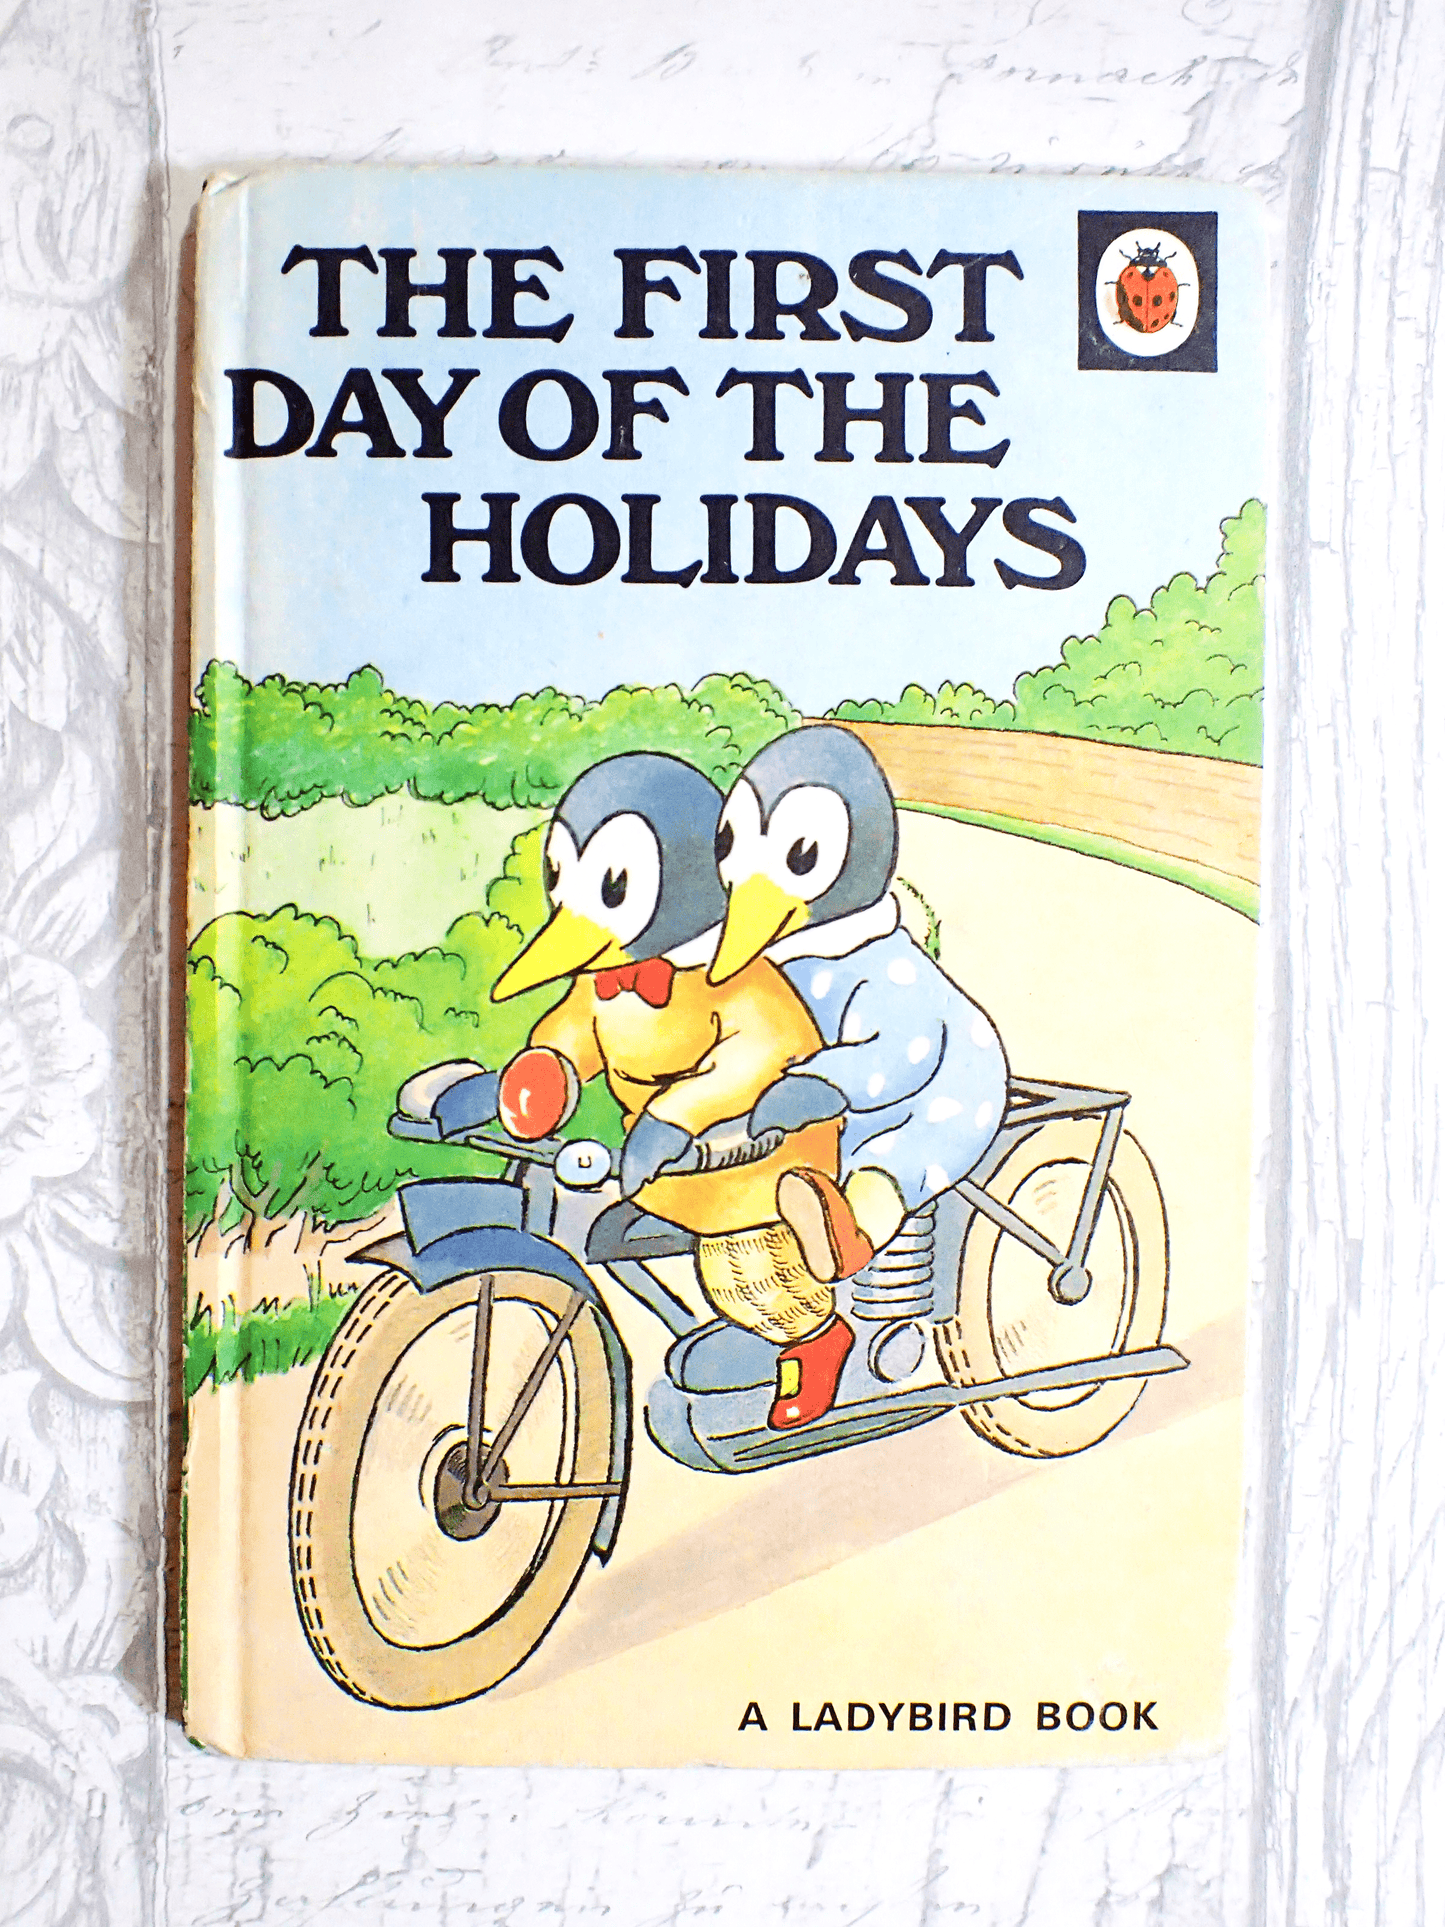 Vintage Ladybird Children's book featuring penguins against a pale grey background. 